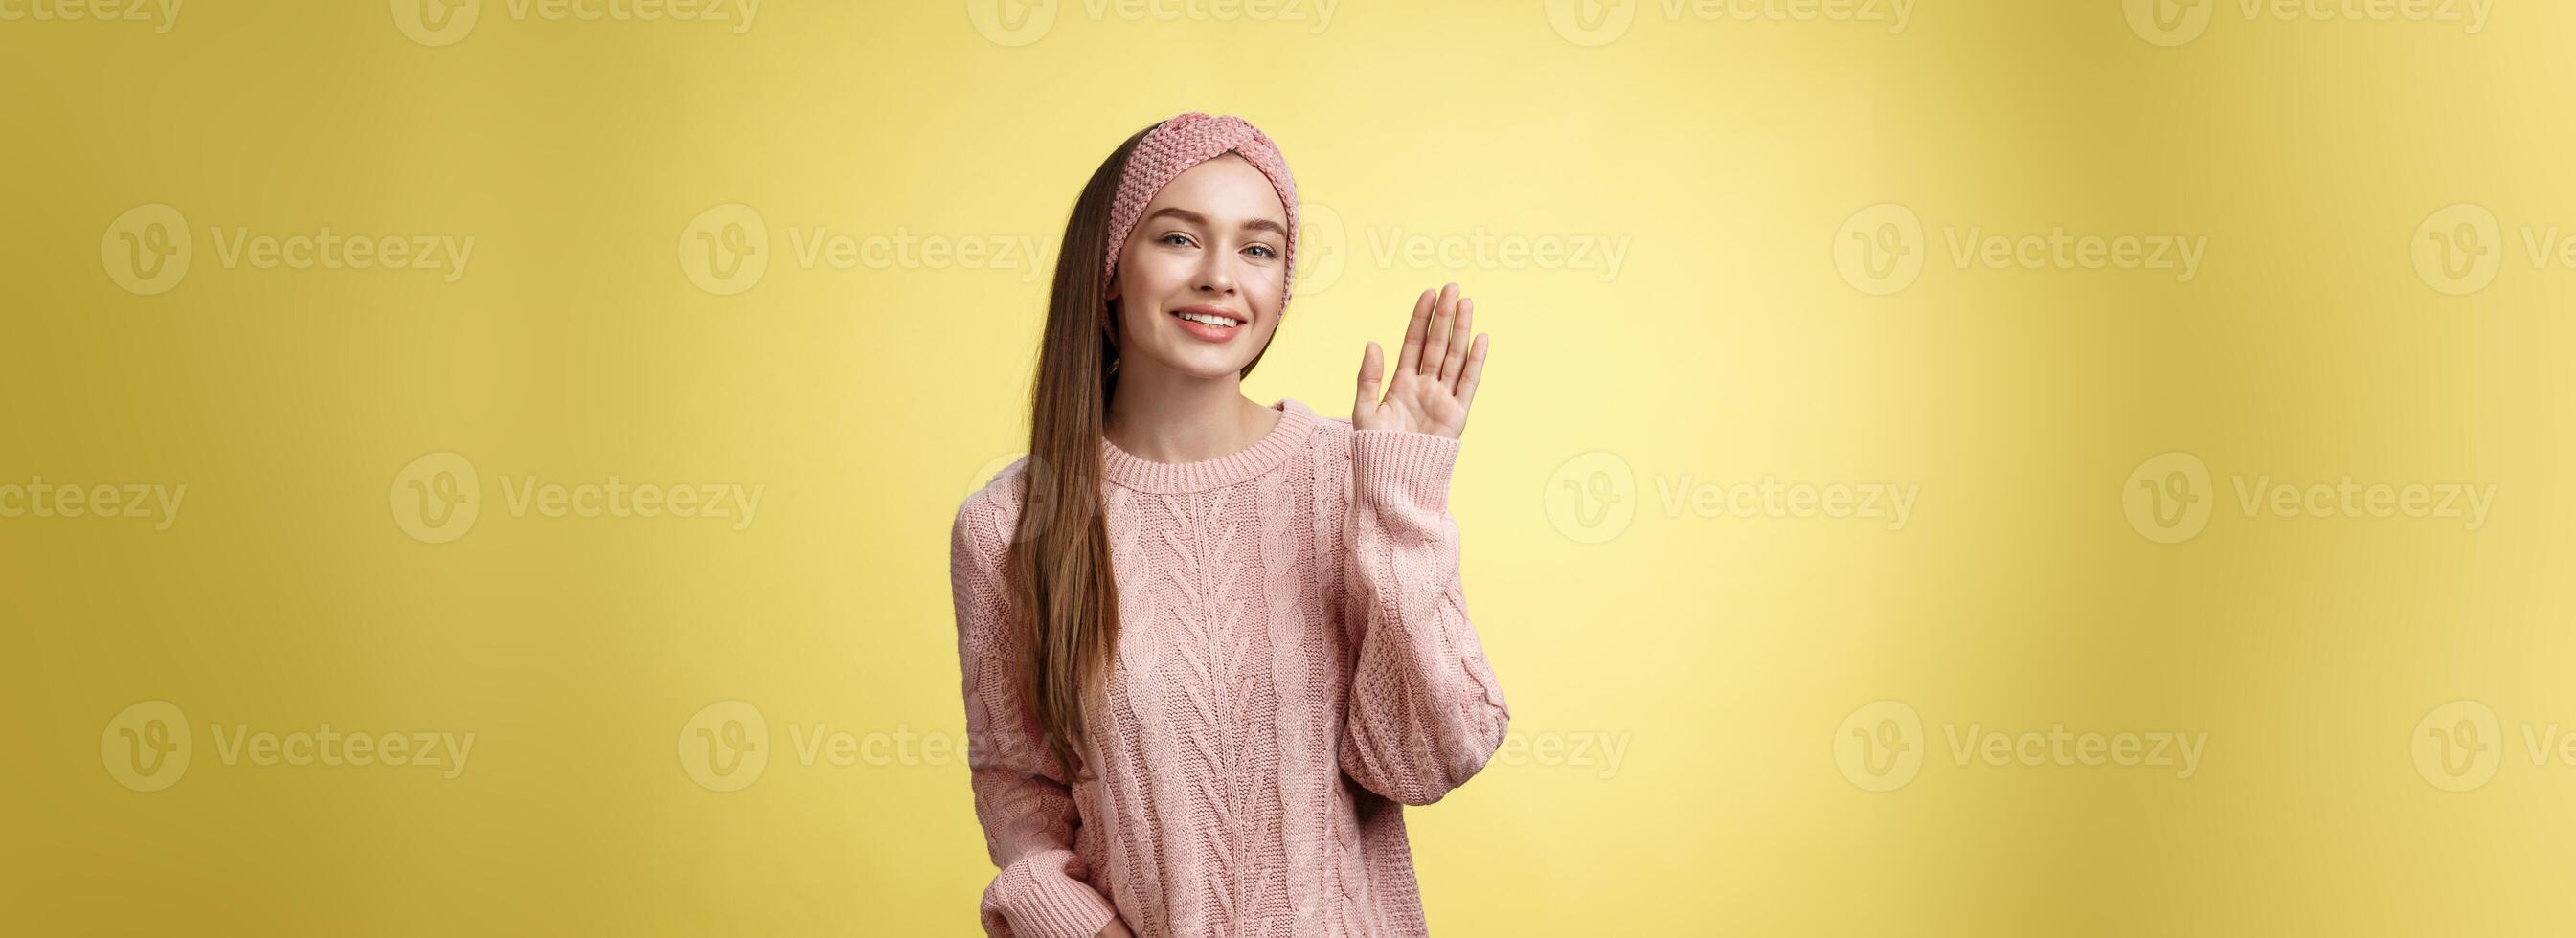 Hello adventures. Charming glamour 20s girl in sweater, knitted headband waving palm saying hi friendly smiling, holding hand in pocket gretting friends, posing positive and carefree over yellow wall photo